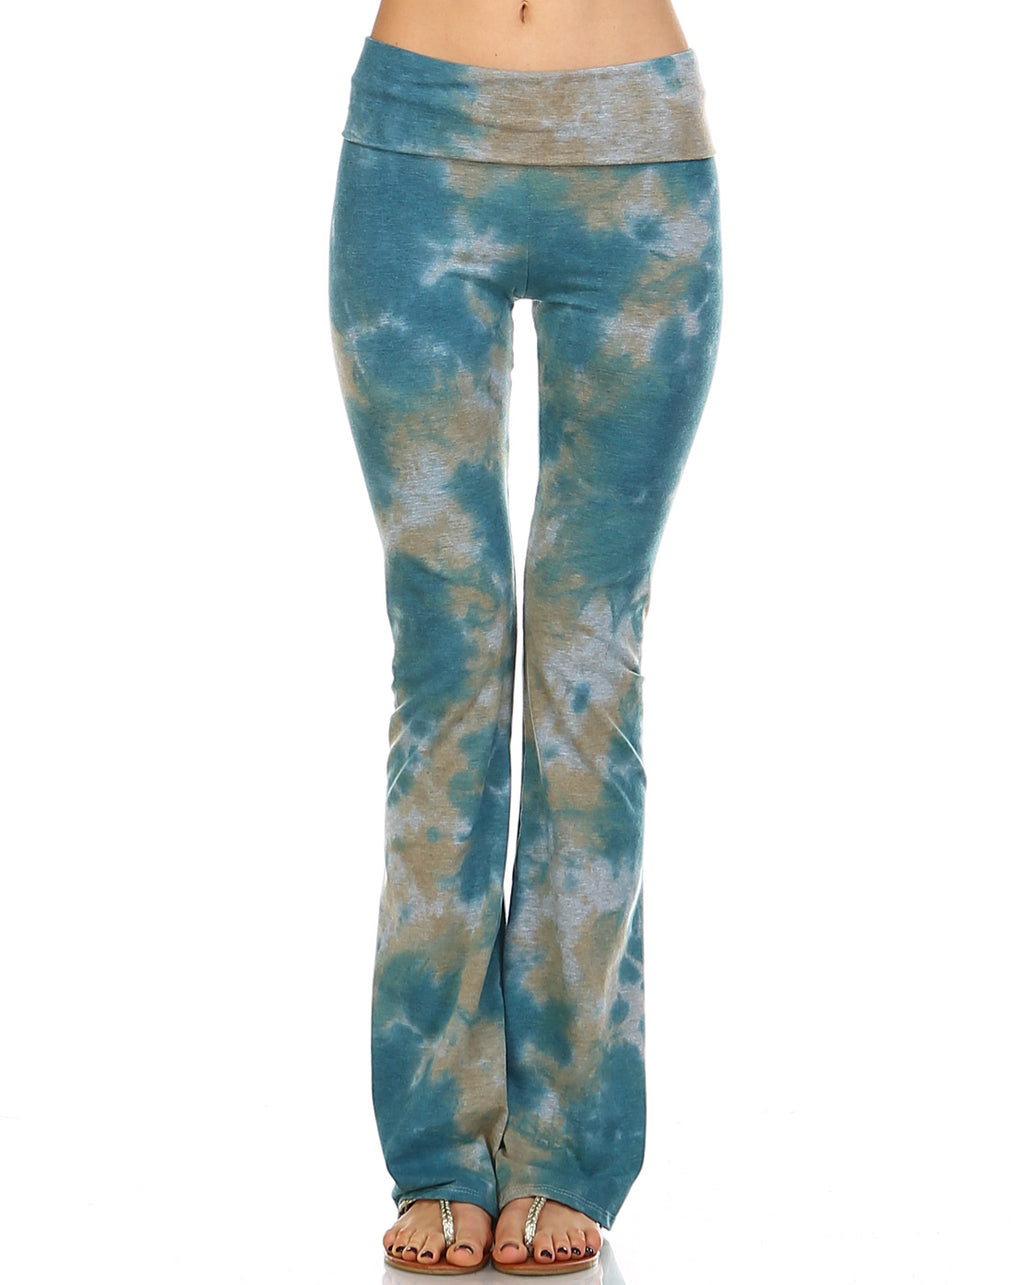 Front side Comfy Yoga pants with Crystal Cloud tie dye,These comfortable, stretchy yoga pants are perfect for a relaxing day